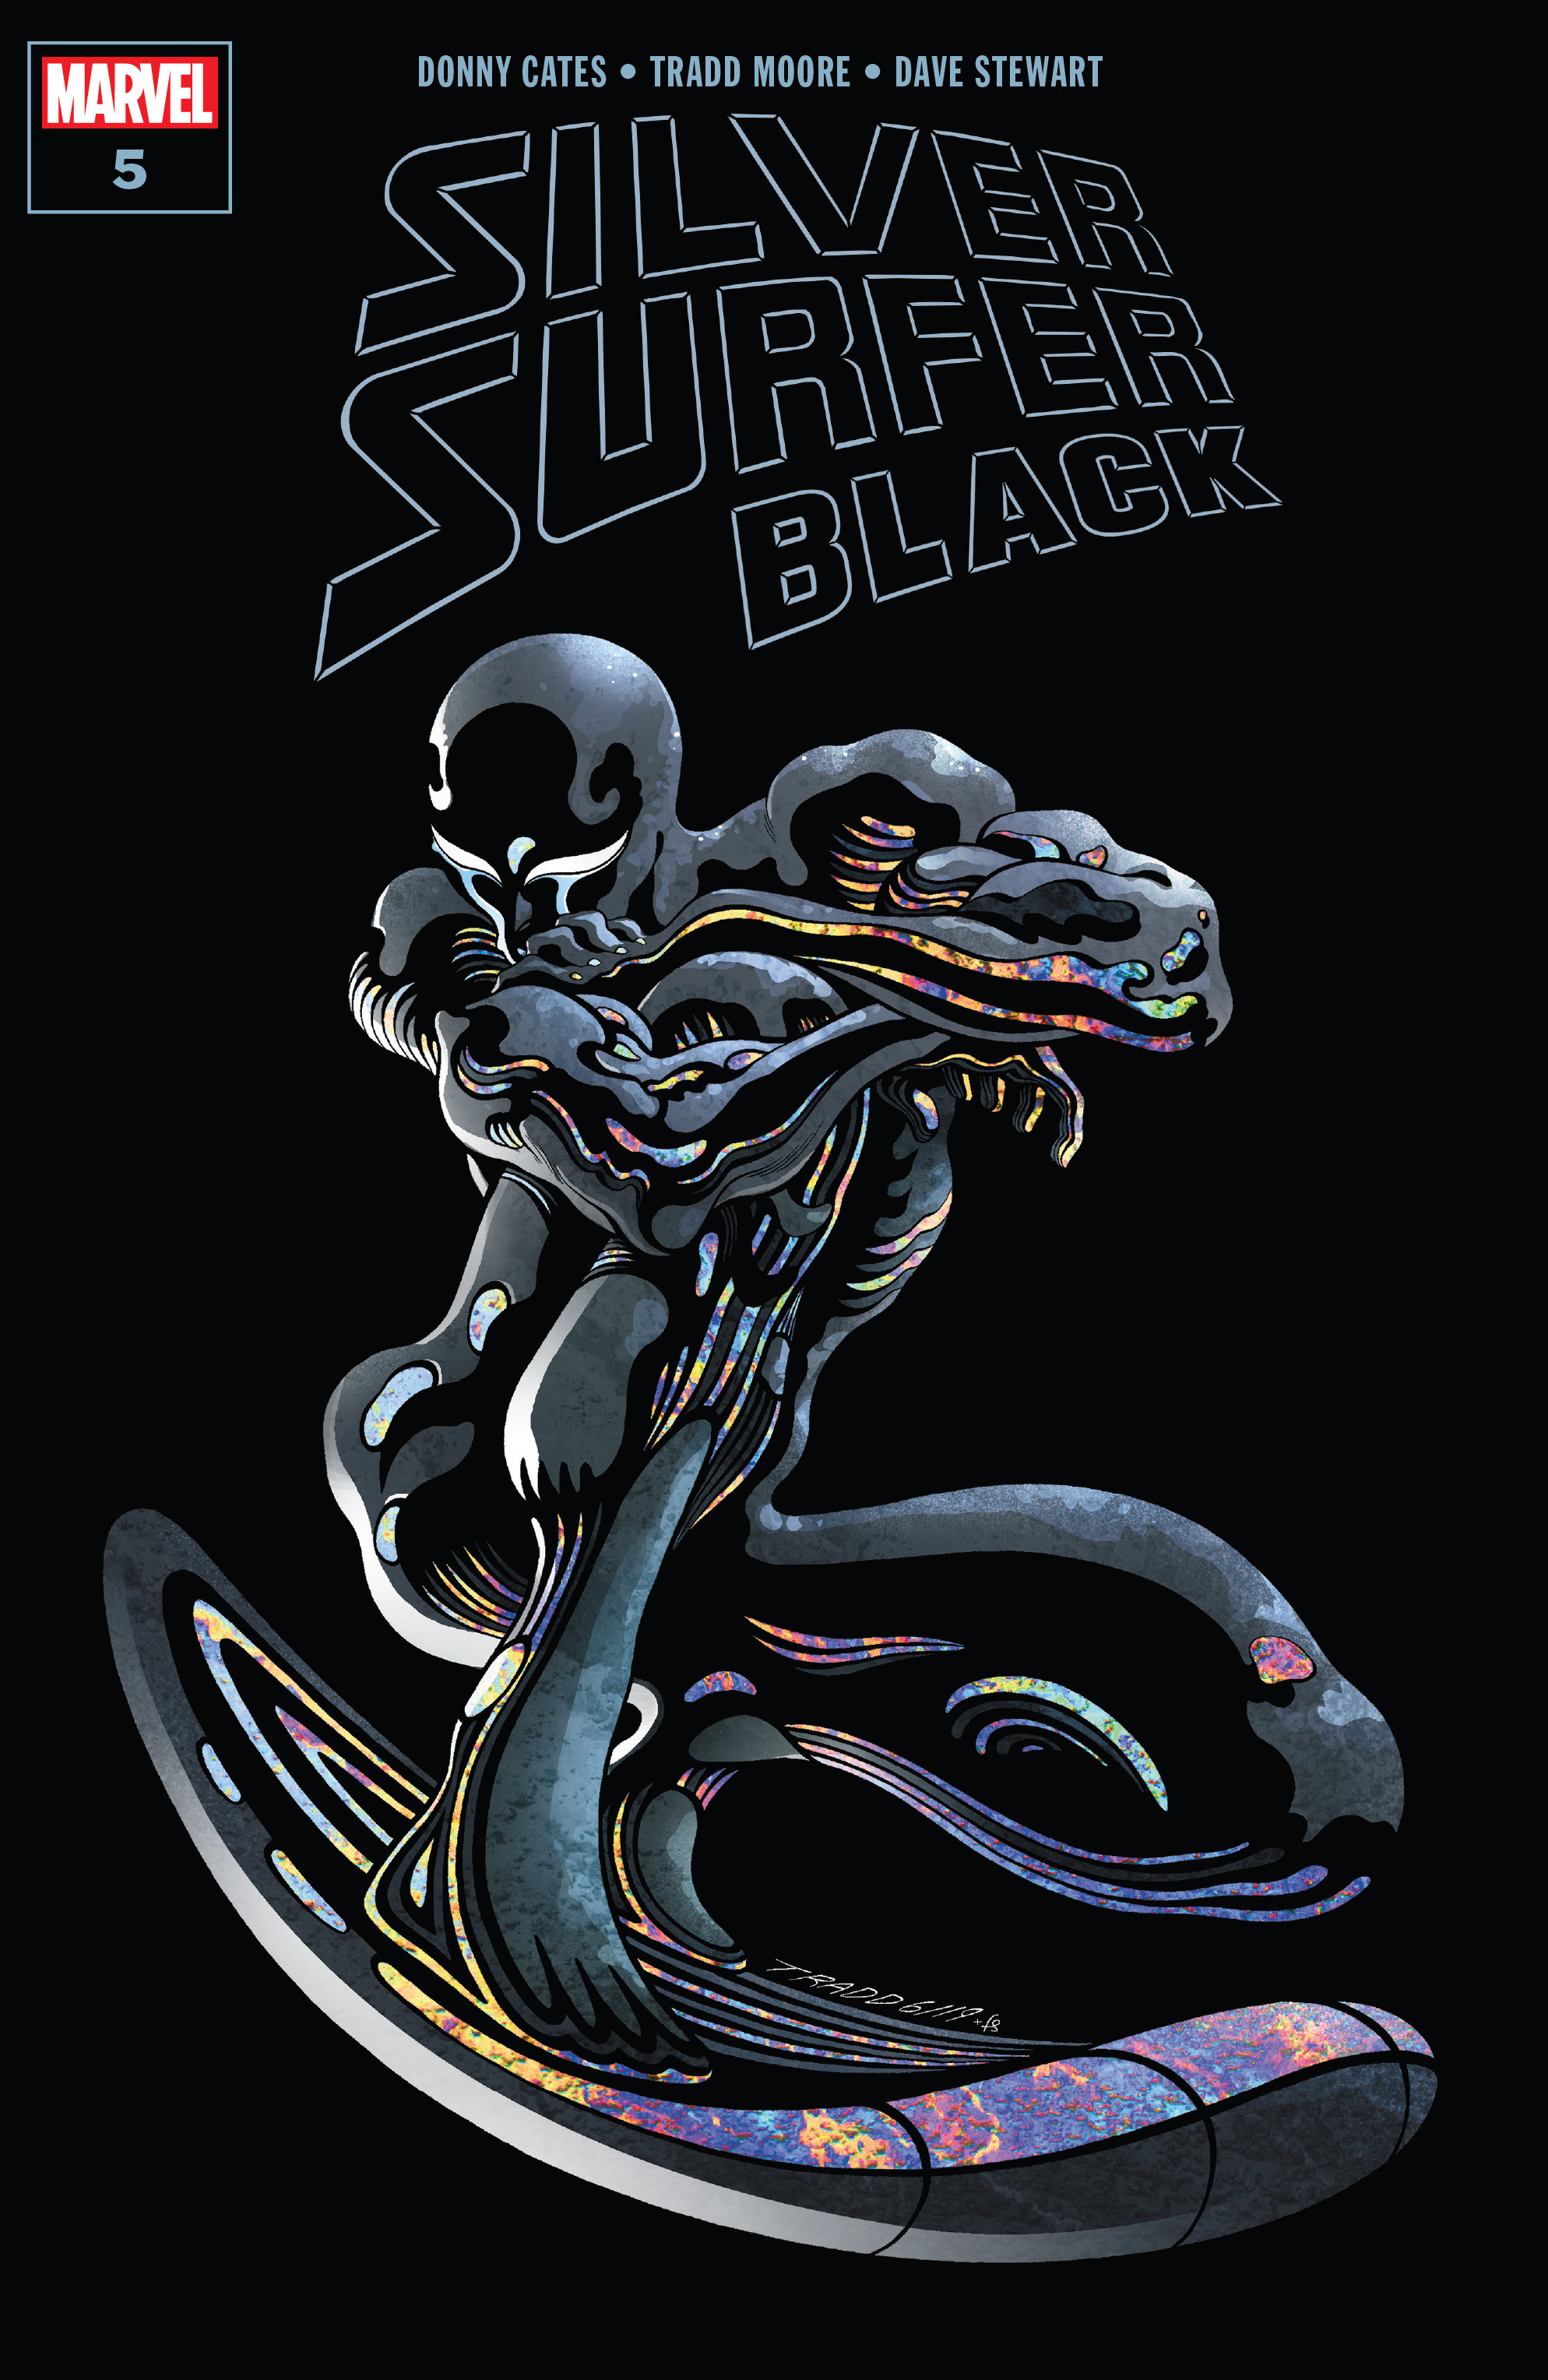 Read online Silver Surfer: Black comic -  Issue #5 - 1